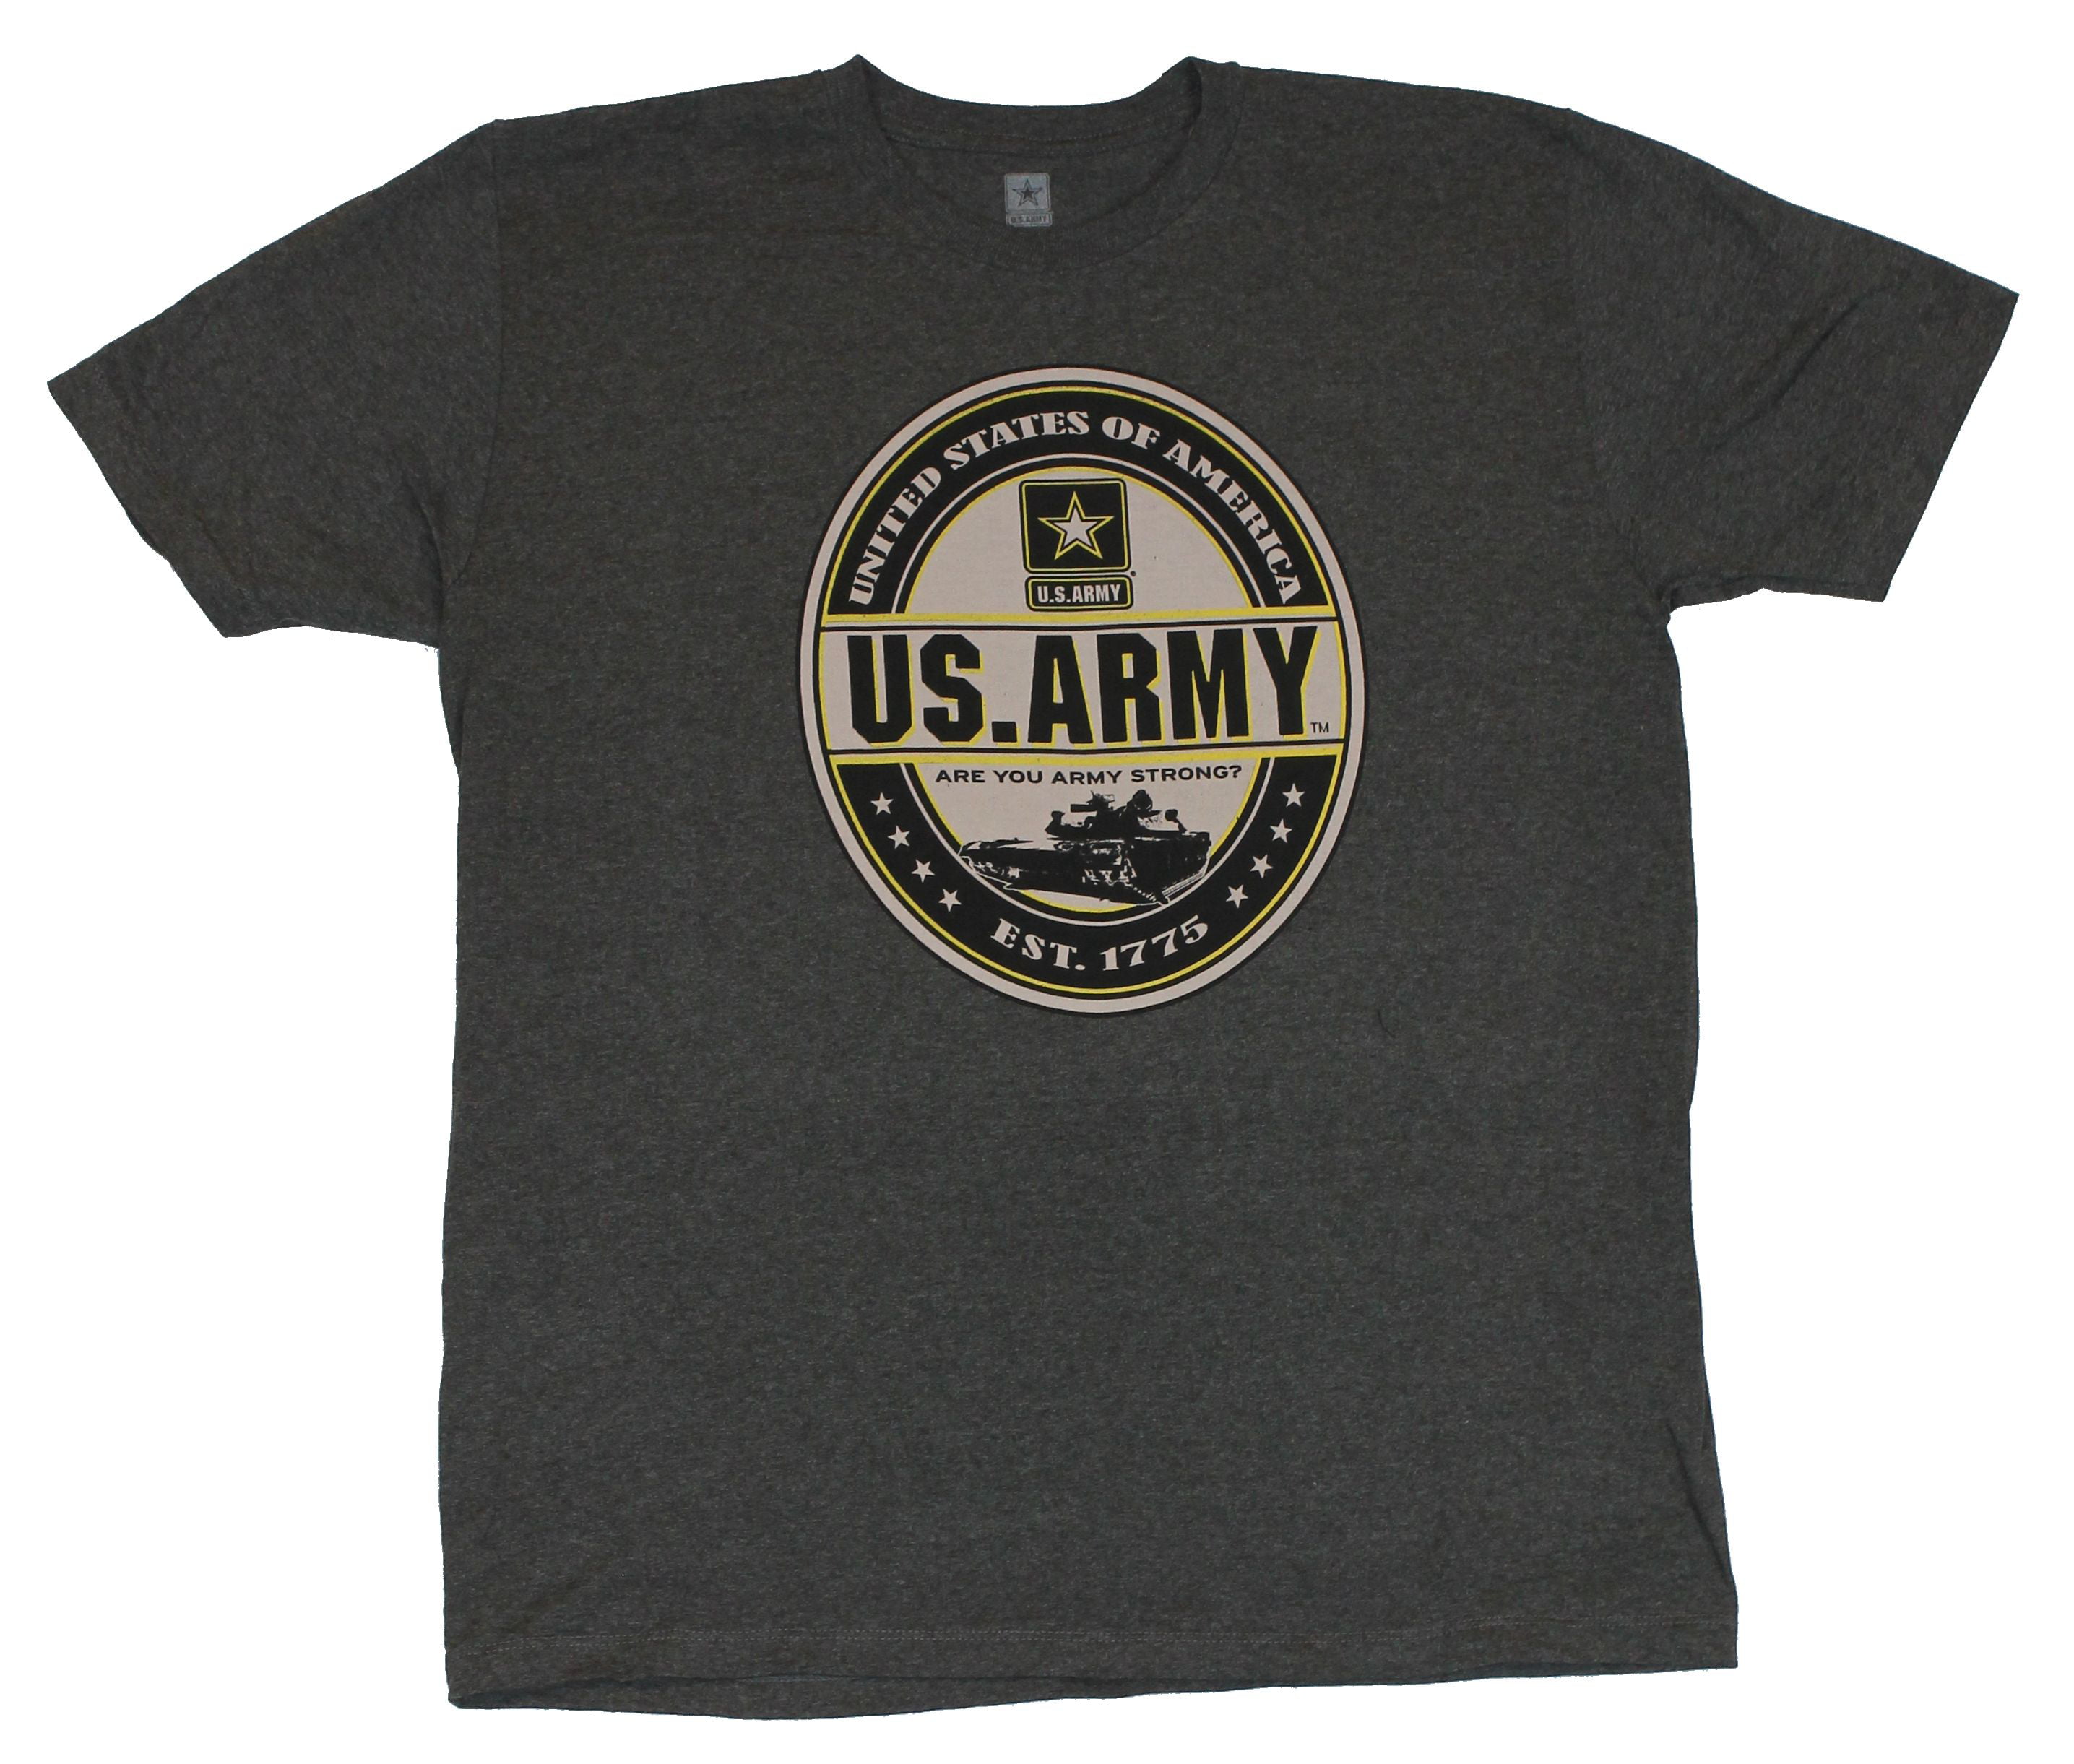 In My Parents Basement - Army US Army Mens T-Shirt - 